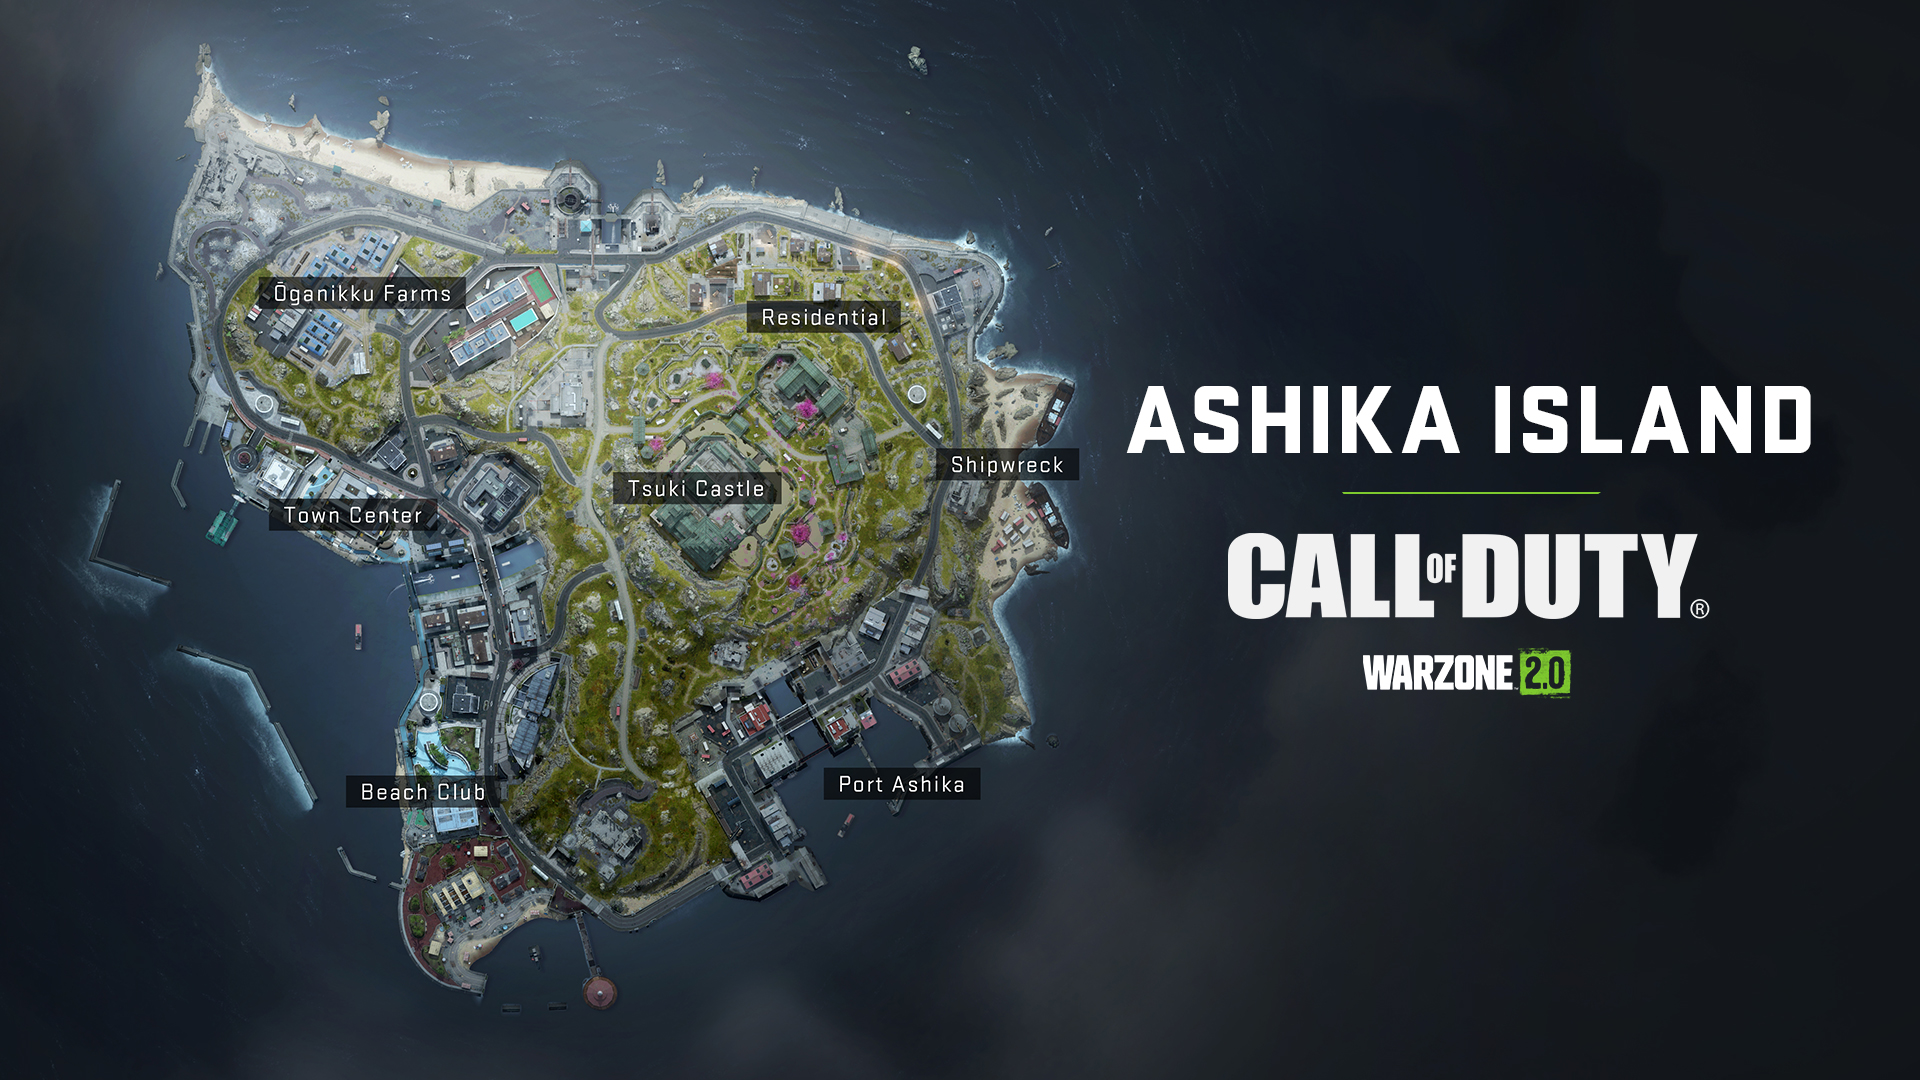 Top down picture of new map "Ashika Island", Points of interest starting top left are "Oganikku Farms", "Town Center", "Beach Club", "Tsuki Castle", "Port Ashika", "Shipwreck" and "Residential"